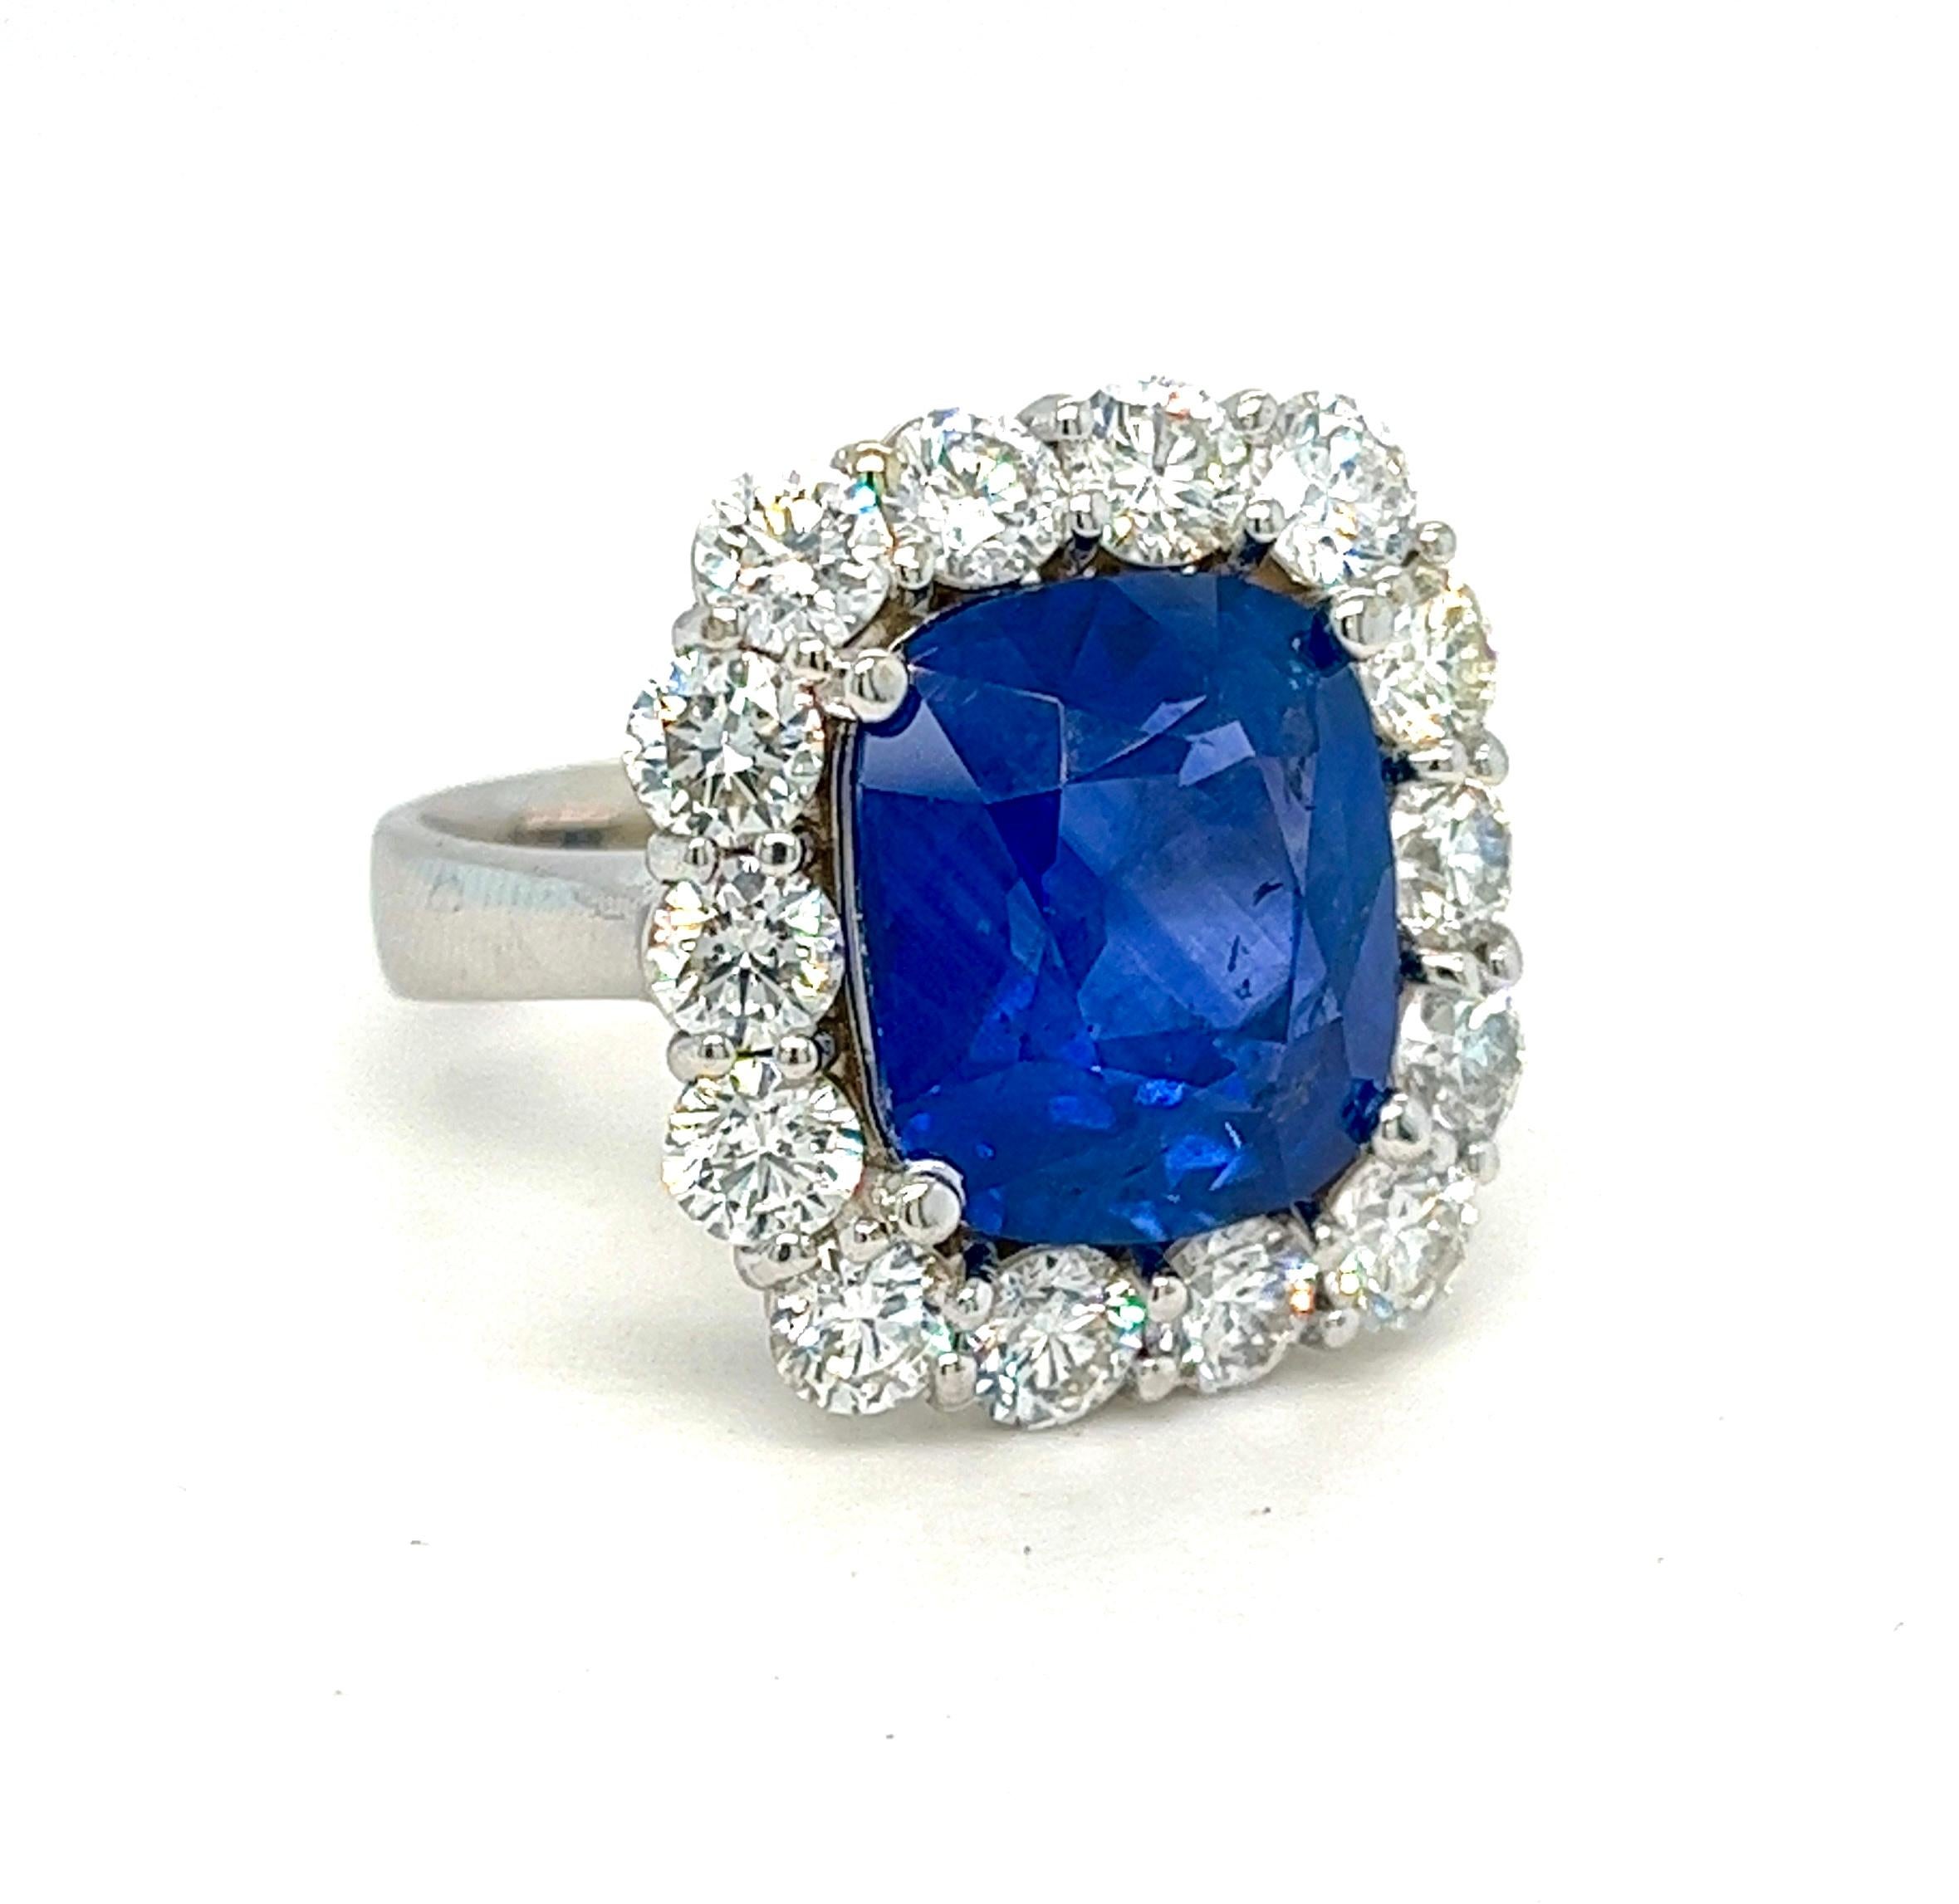 Exquisite 11.87 Carat Natural Sapphire and Diamond Cocktail Ring For Sale 1